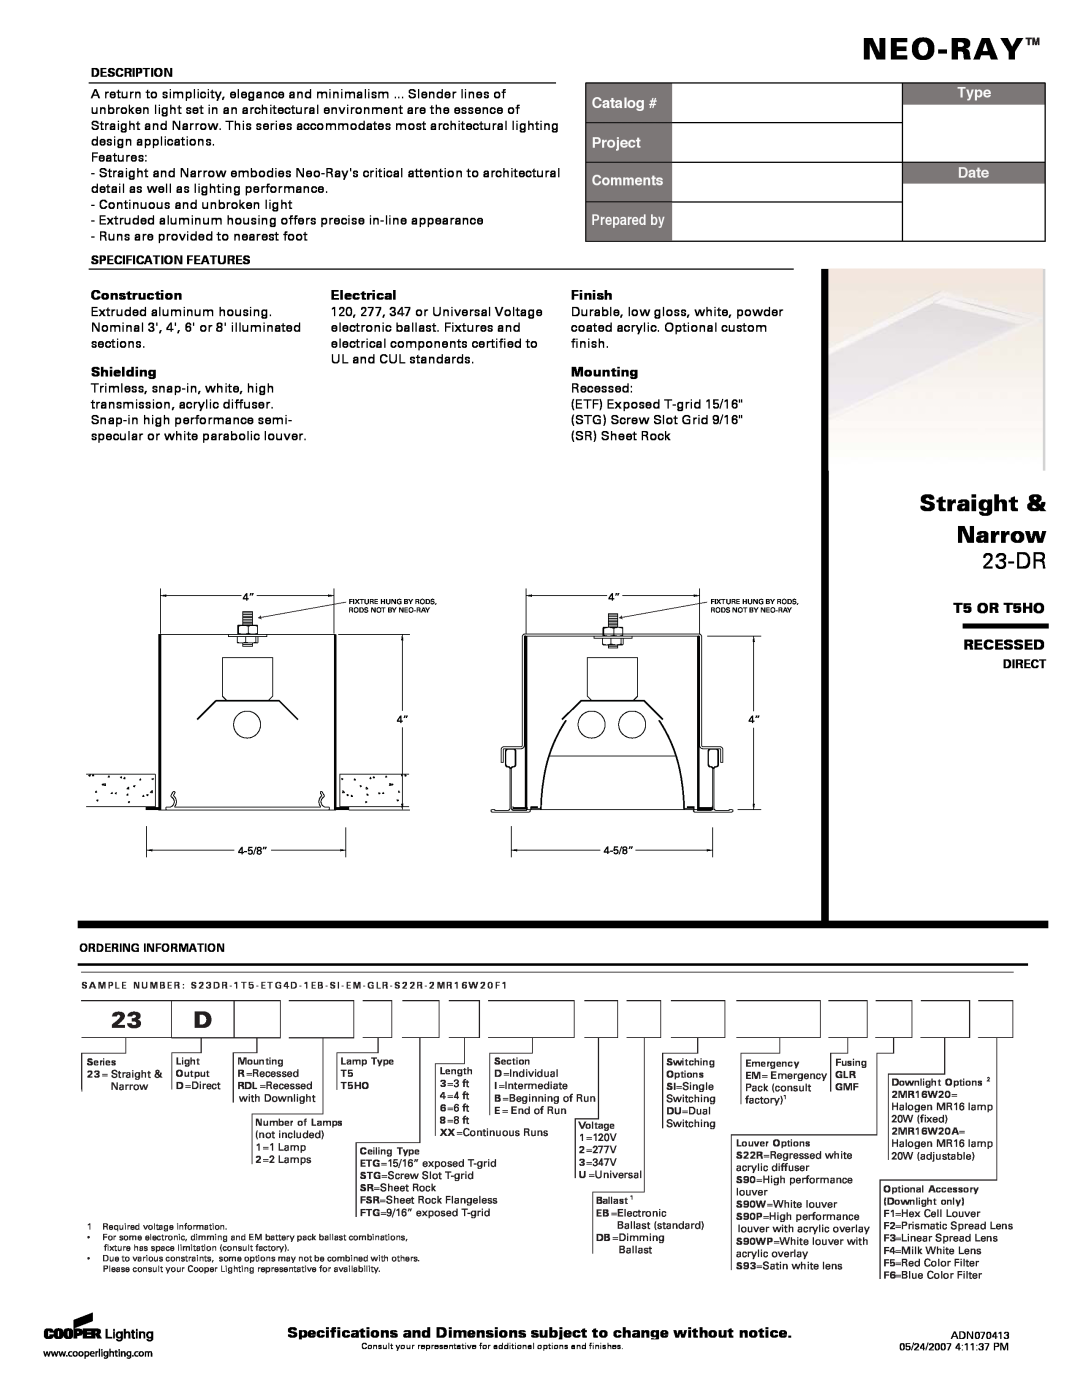 Cooper Lighting specifications T5 OR T5HO RECESSED, Neo-Ray, Straight & Narrow, 23-DR, Catalog #, Project Comments 